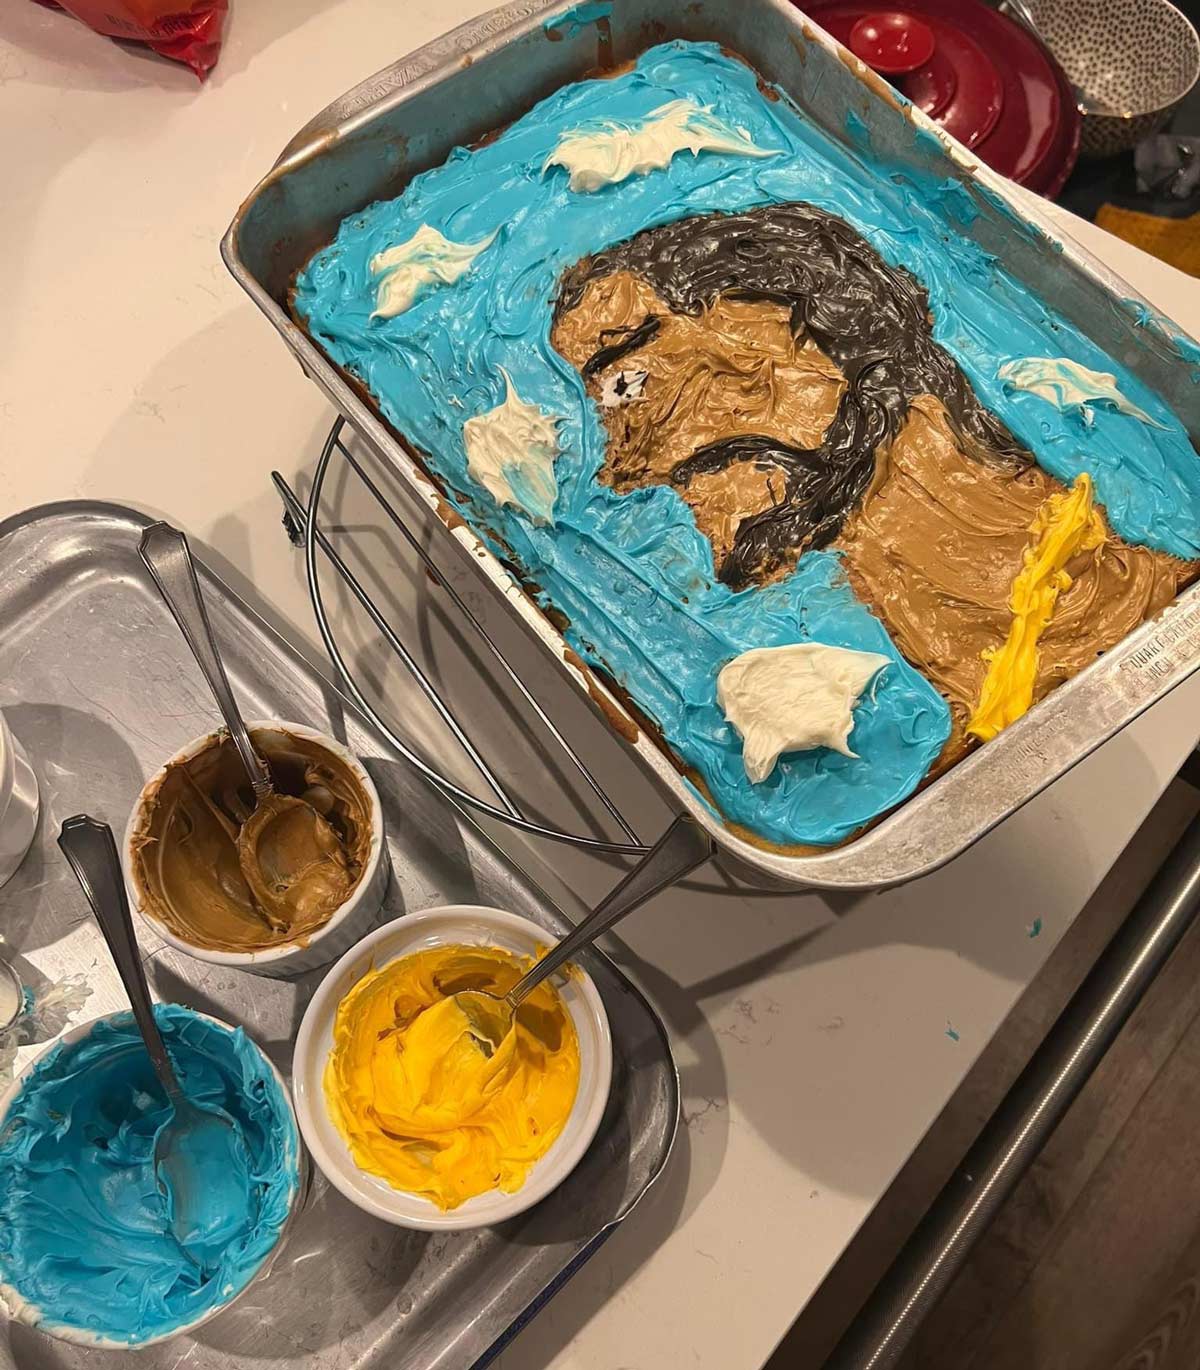 Cool Stuff My friend: "Oh, nice Jesus cake".. Her daughters: "That's Drake"